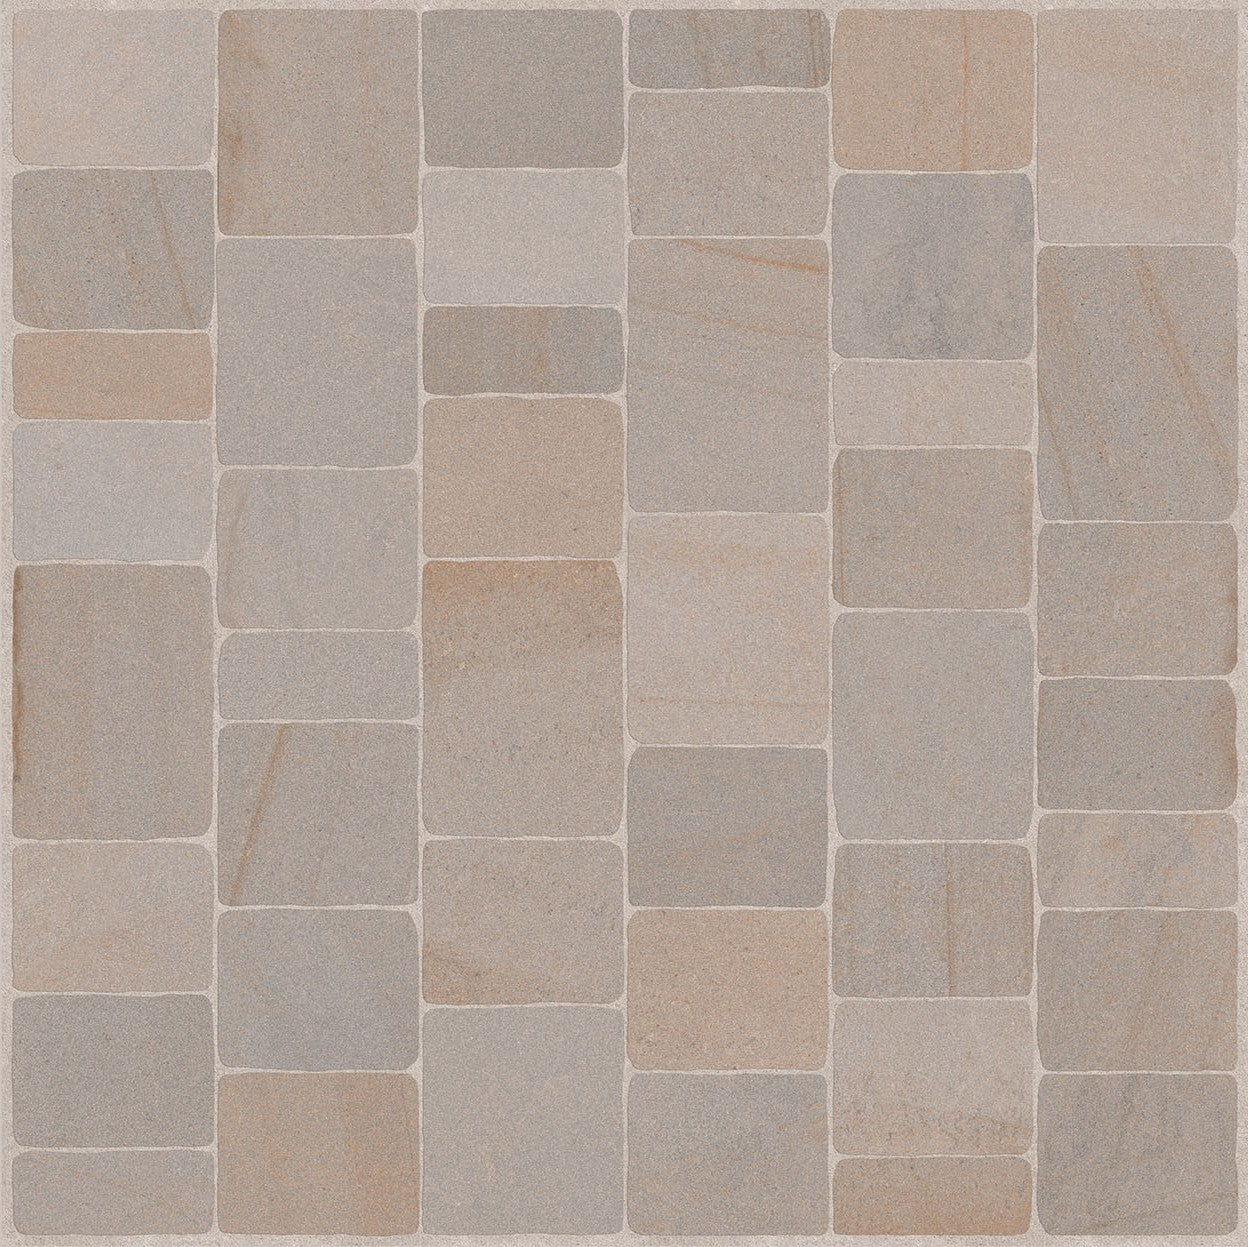 surface group international frontier 20 porcelain paving tile bluestone full color cobblestone multisize 24x24 for outdoor application manufactured by landmark